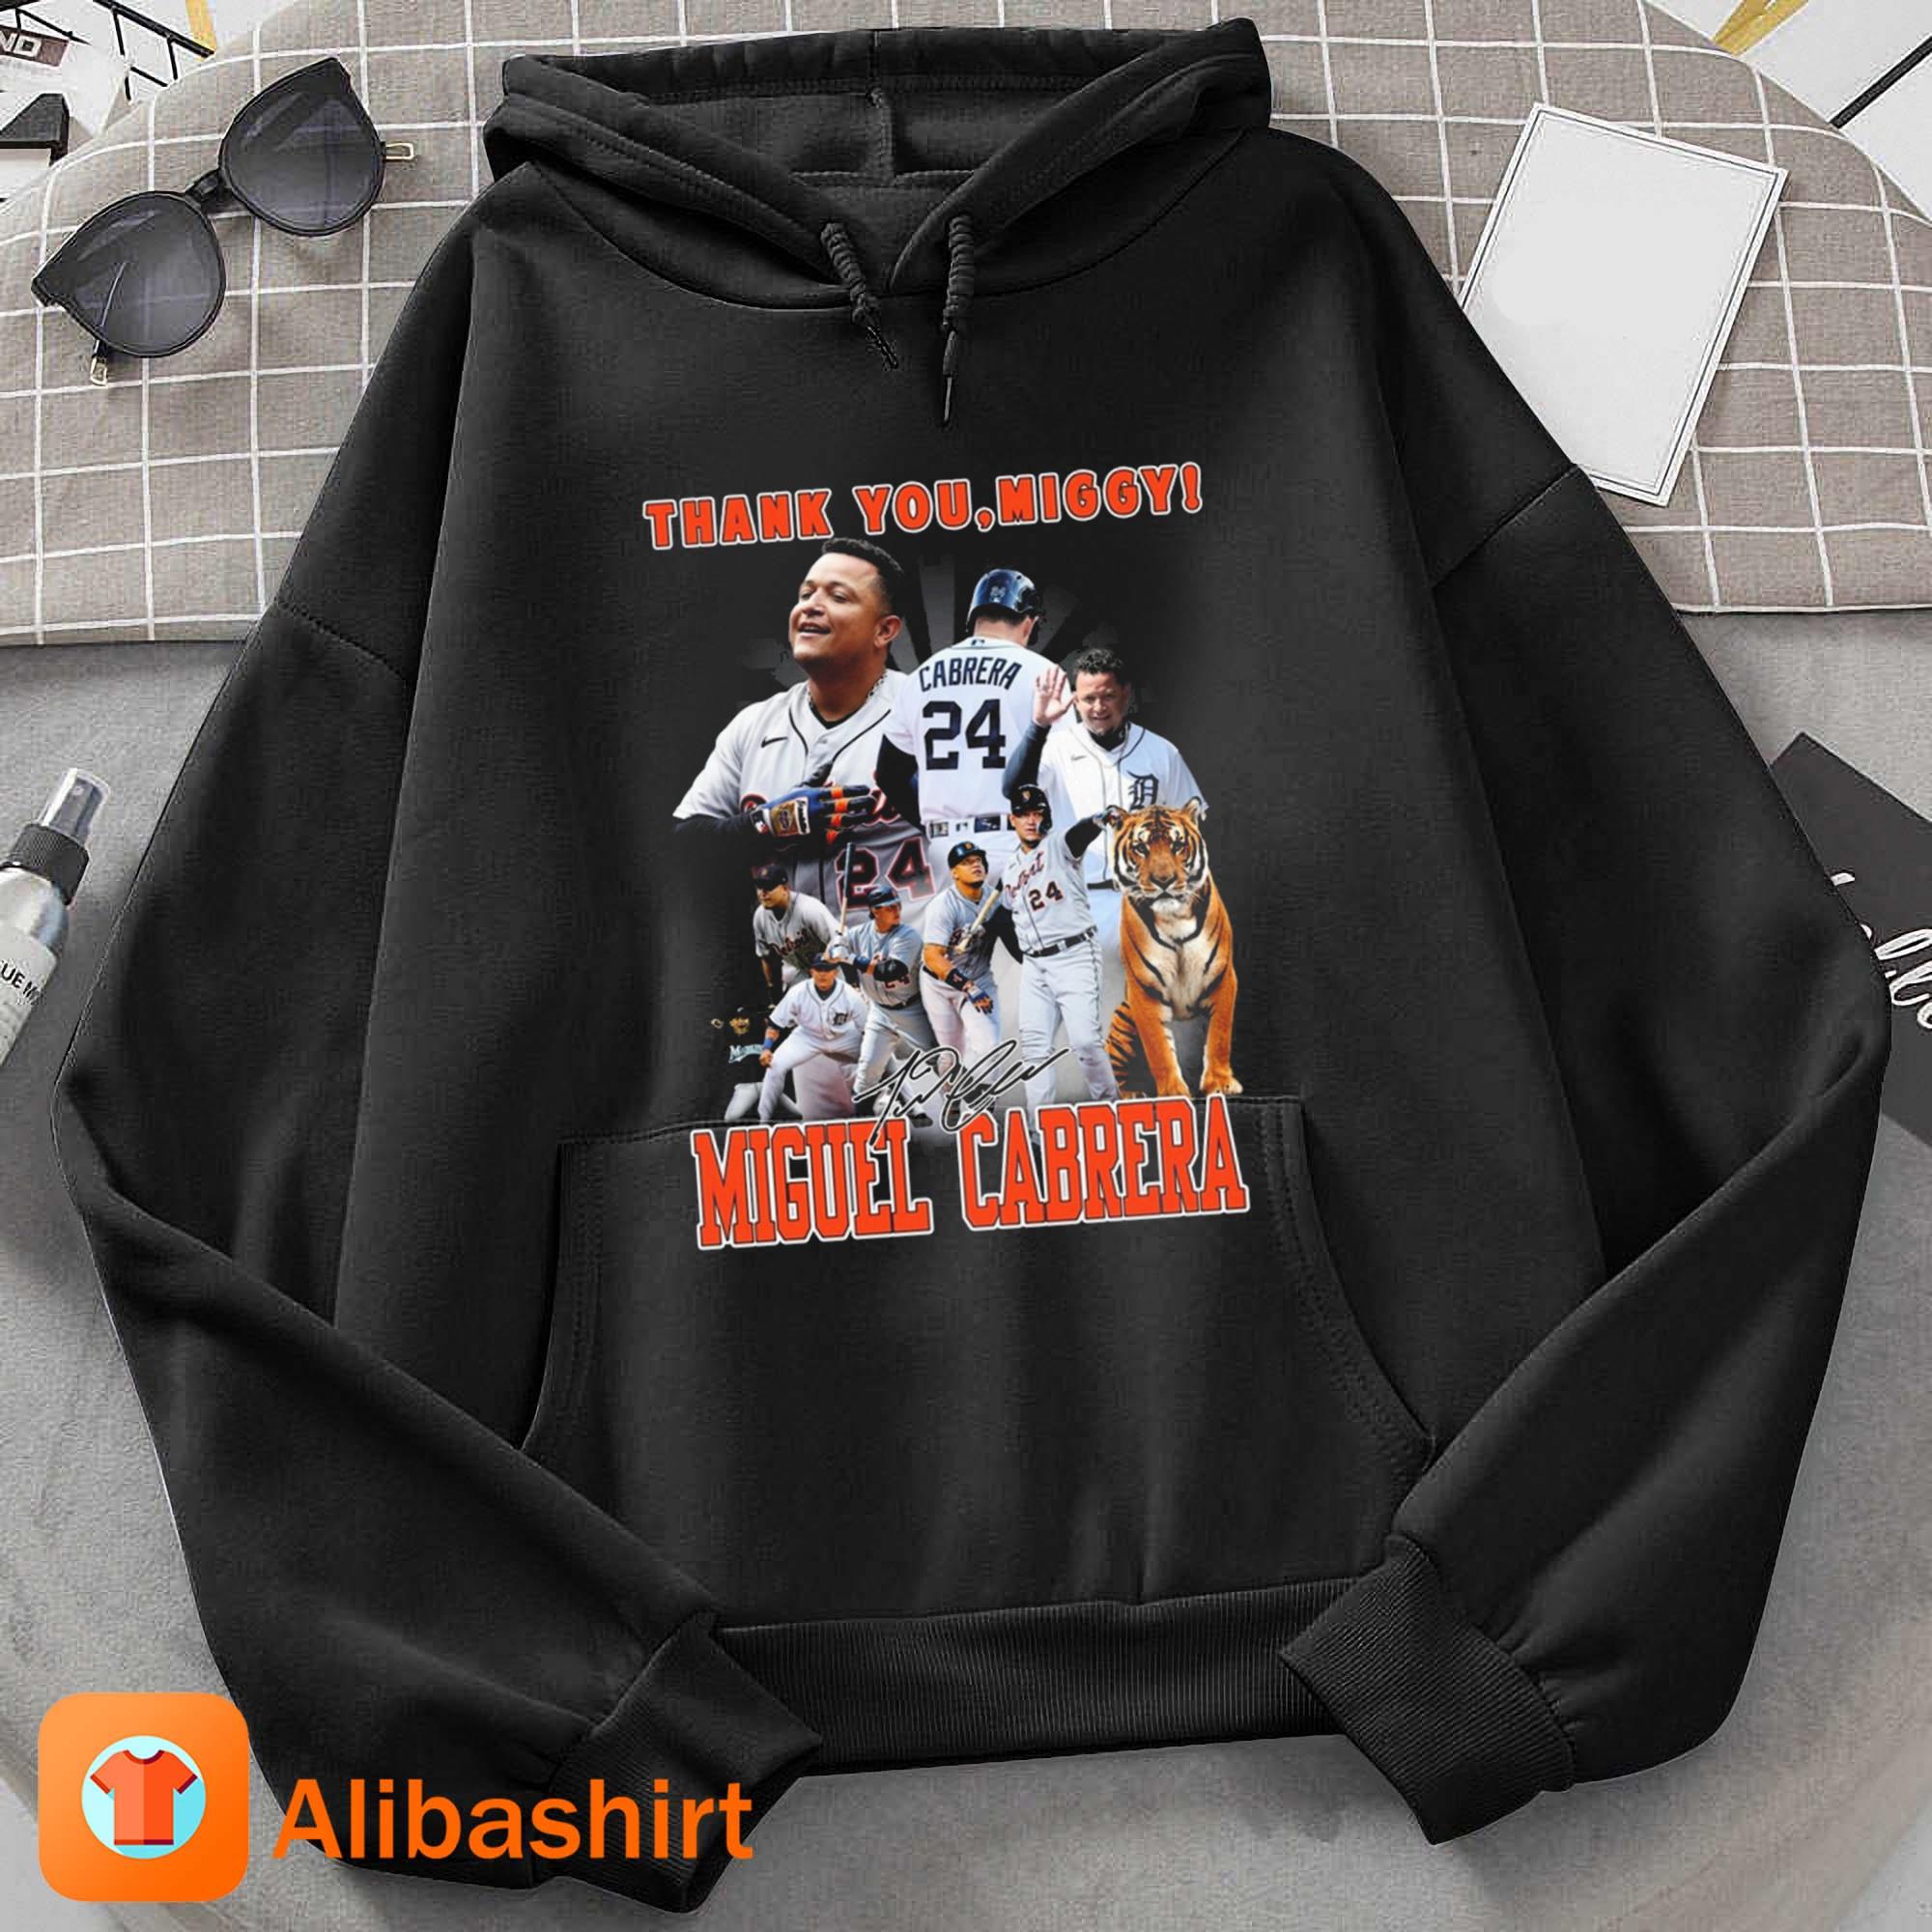 Miguel Cabrera Detroit Tigers thank you miggy signature shirt, hoodie,  sweater, long sleeve and tank top